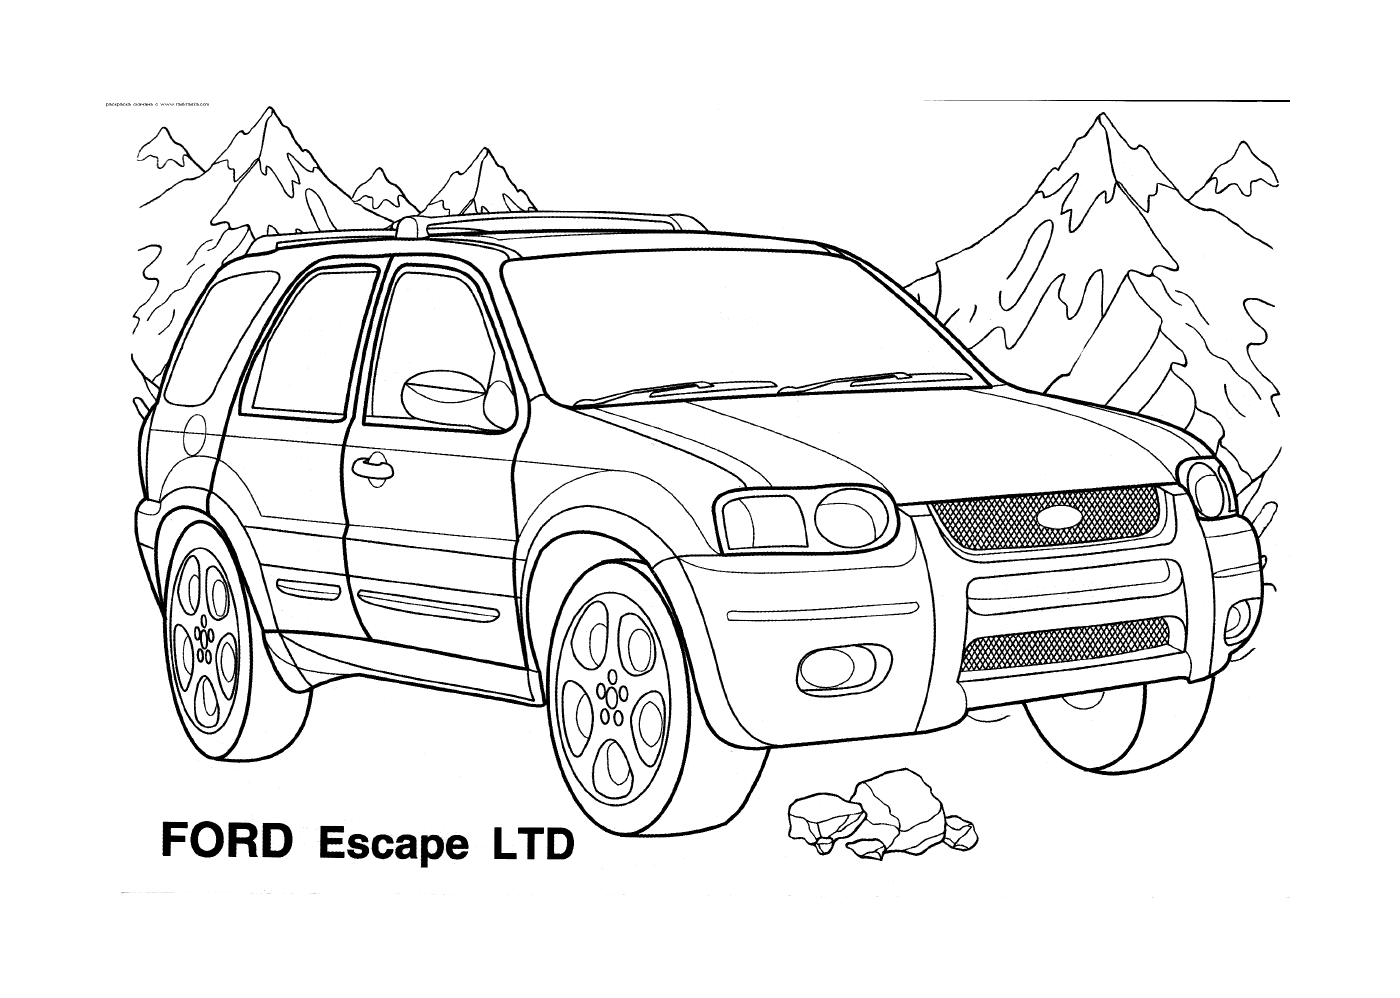  Ford Escape LTD in the mountains 